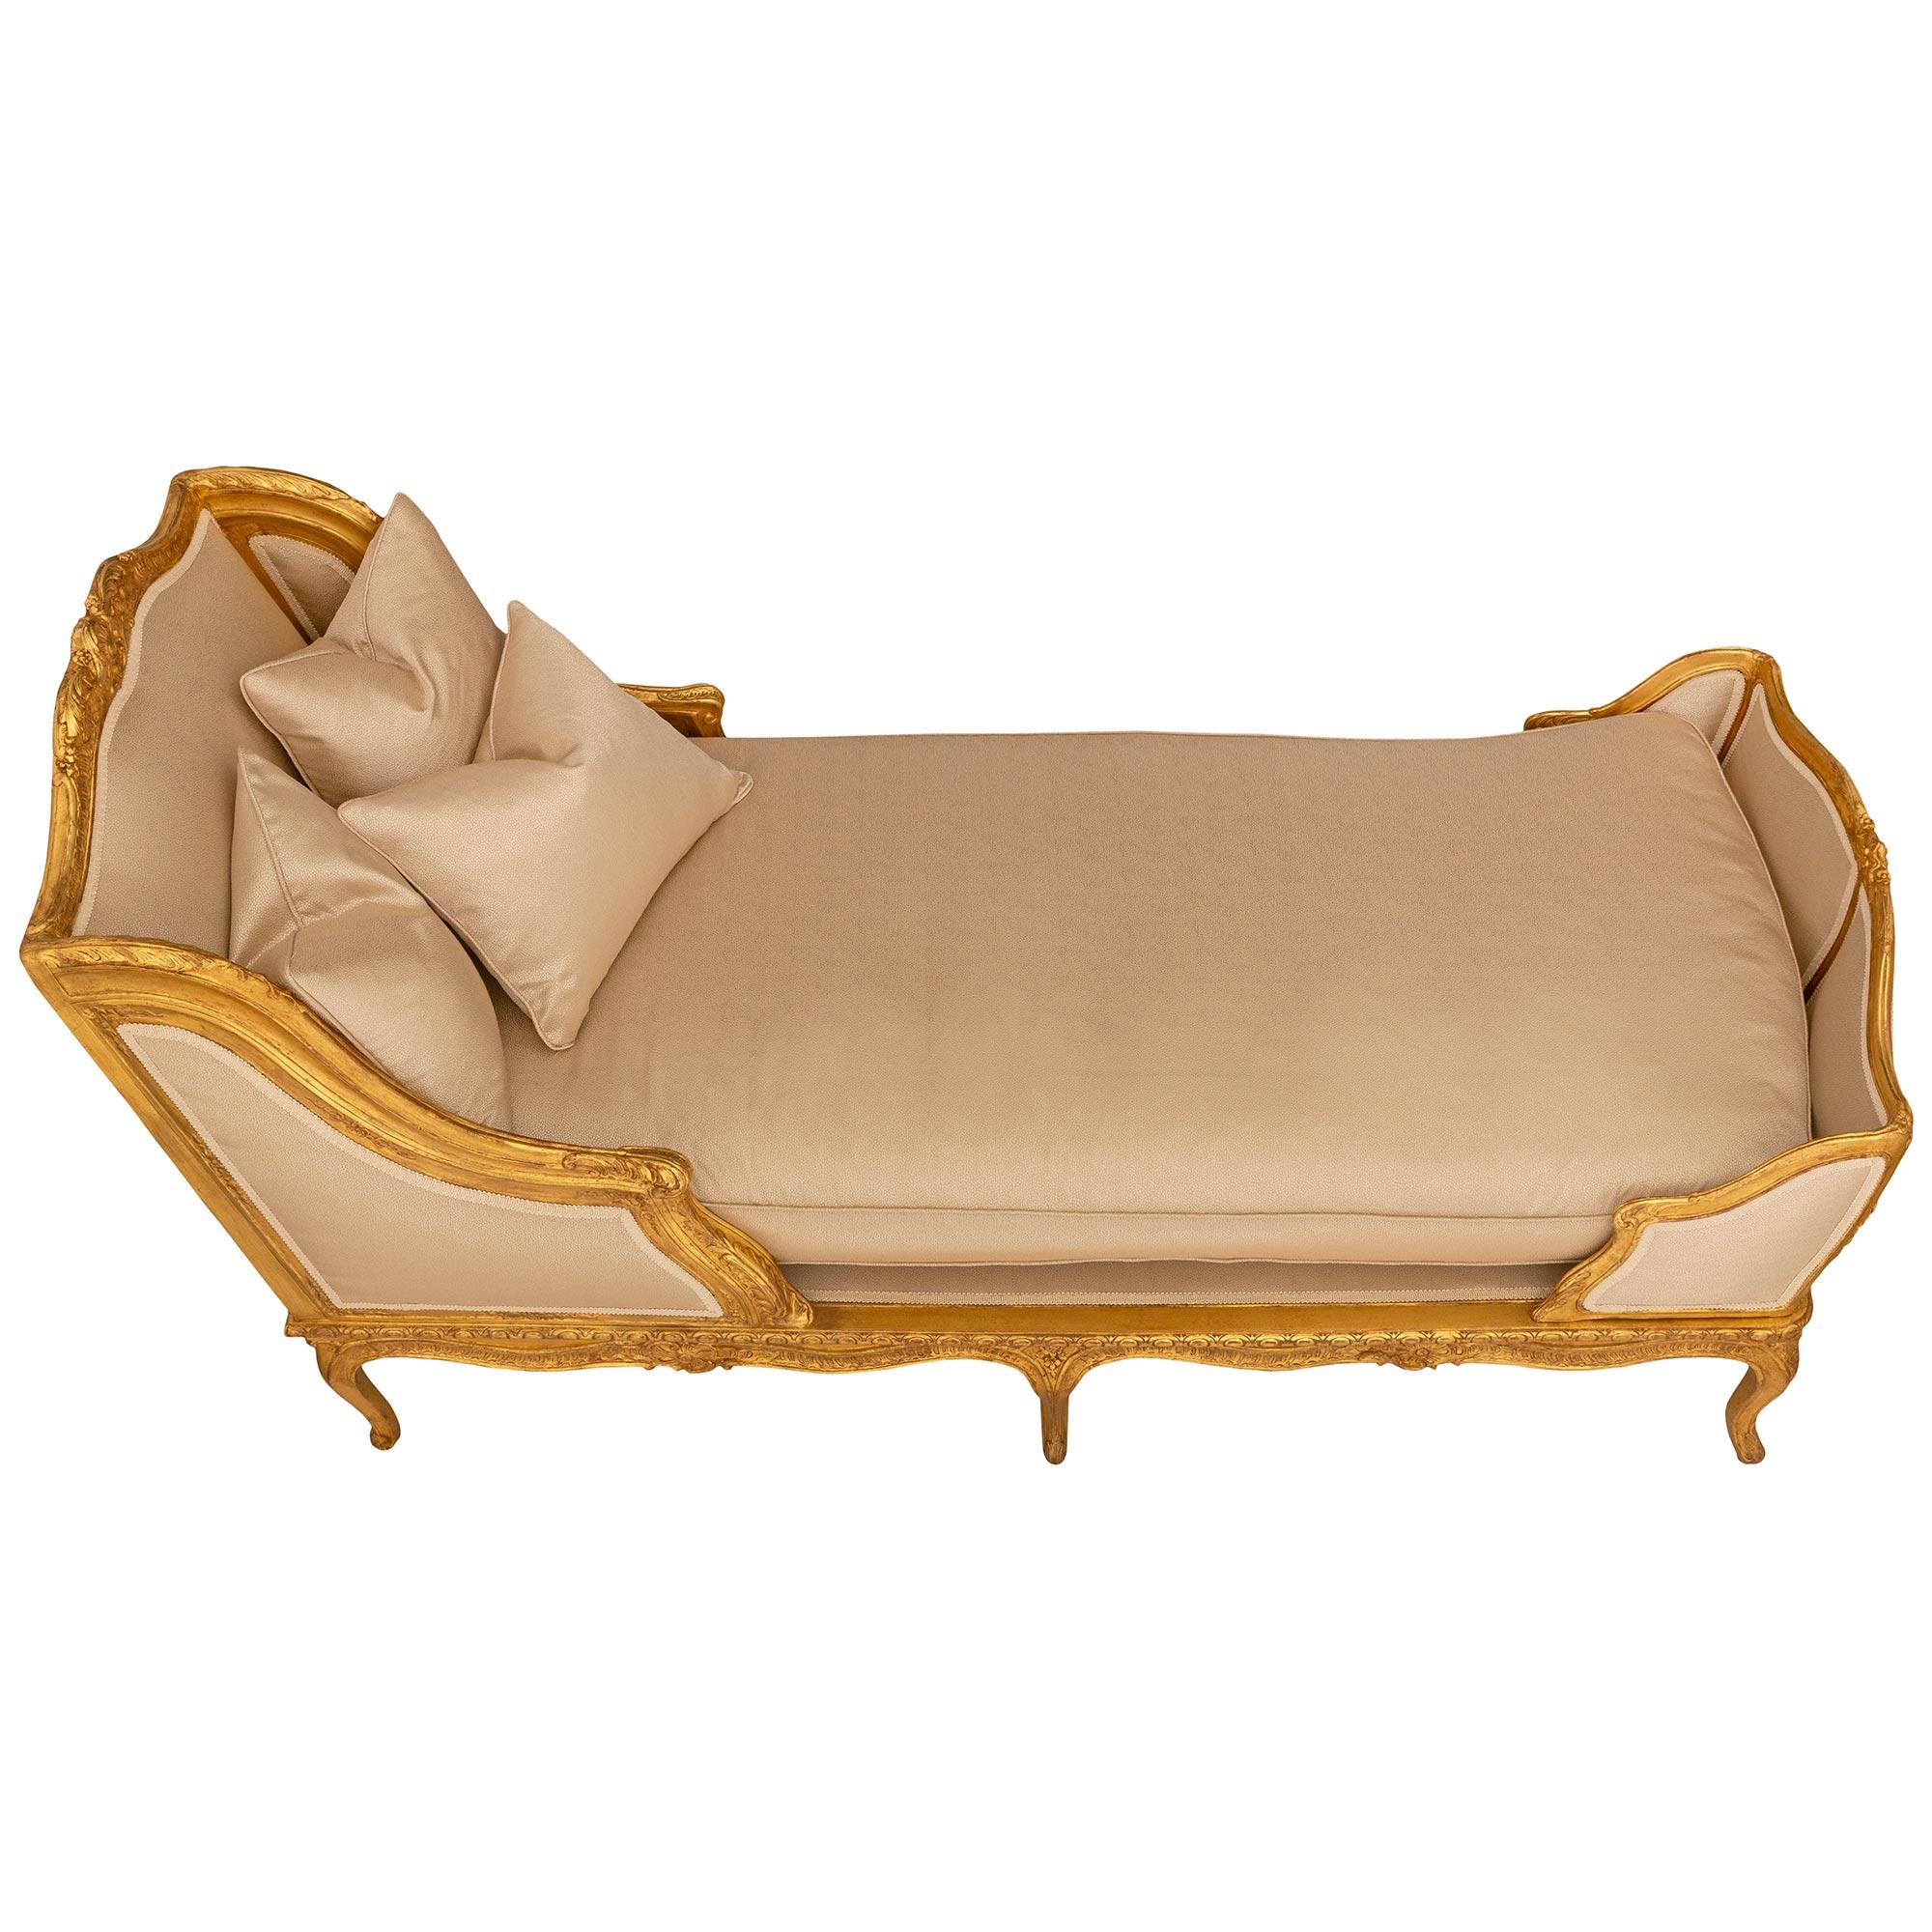 A French early 19th century Regence st. recamier chaise For Sale 5